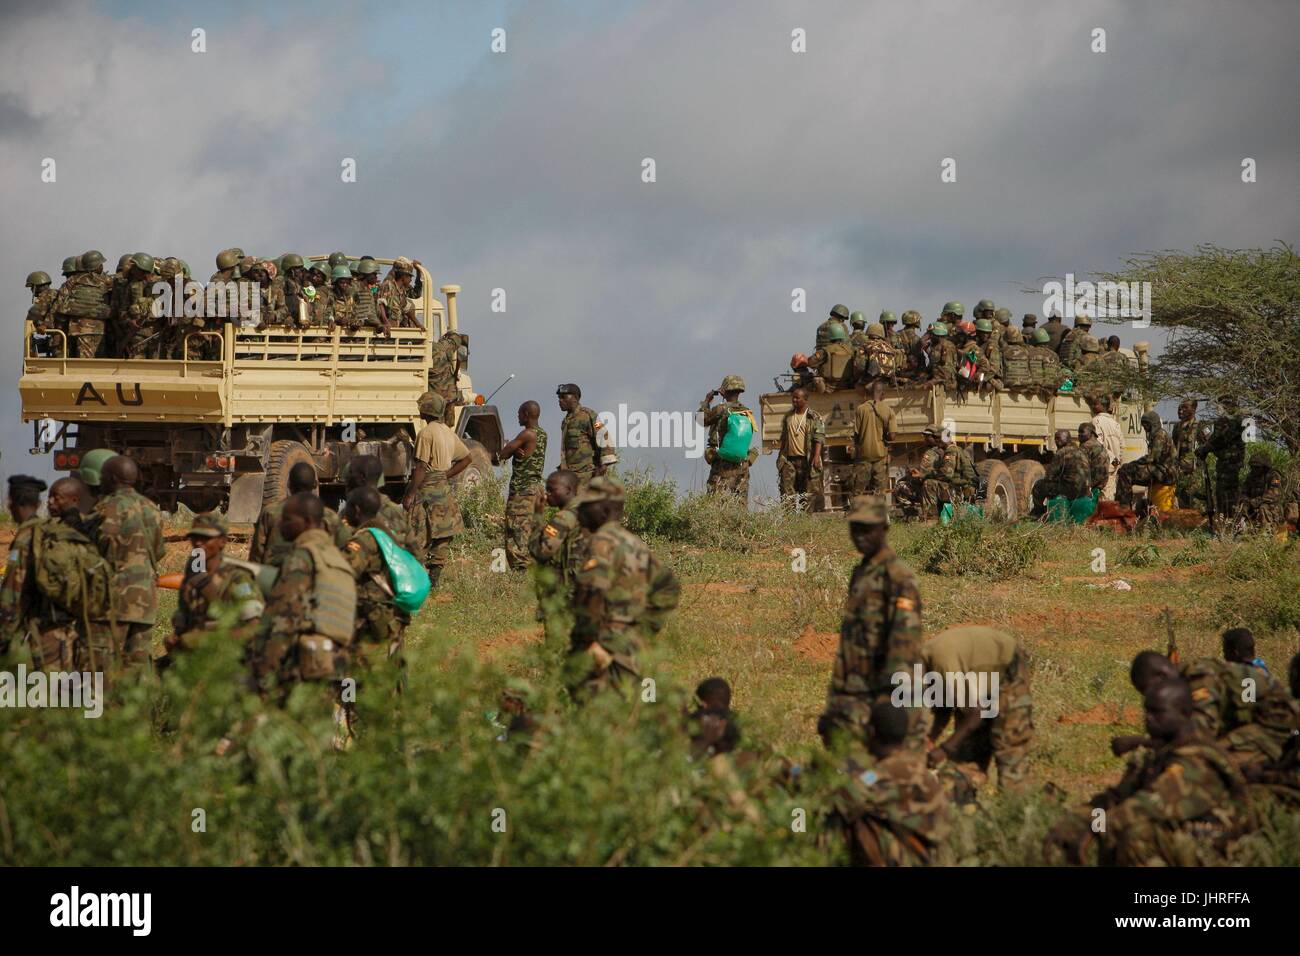 Ugandan soldiers board military trucks as they prepare to deploy to Merka to drive out the Al-Qaeda-affiliated extremist group Al Shabaab May 27, 2012 in Afgoye, Somalia.    (photo by Stuart Price  via Planetpix) Stock Photo